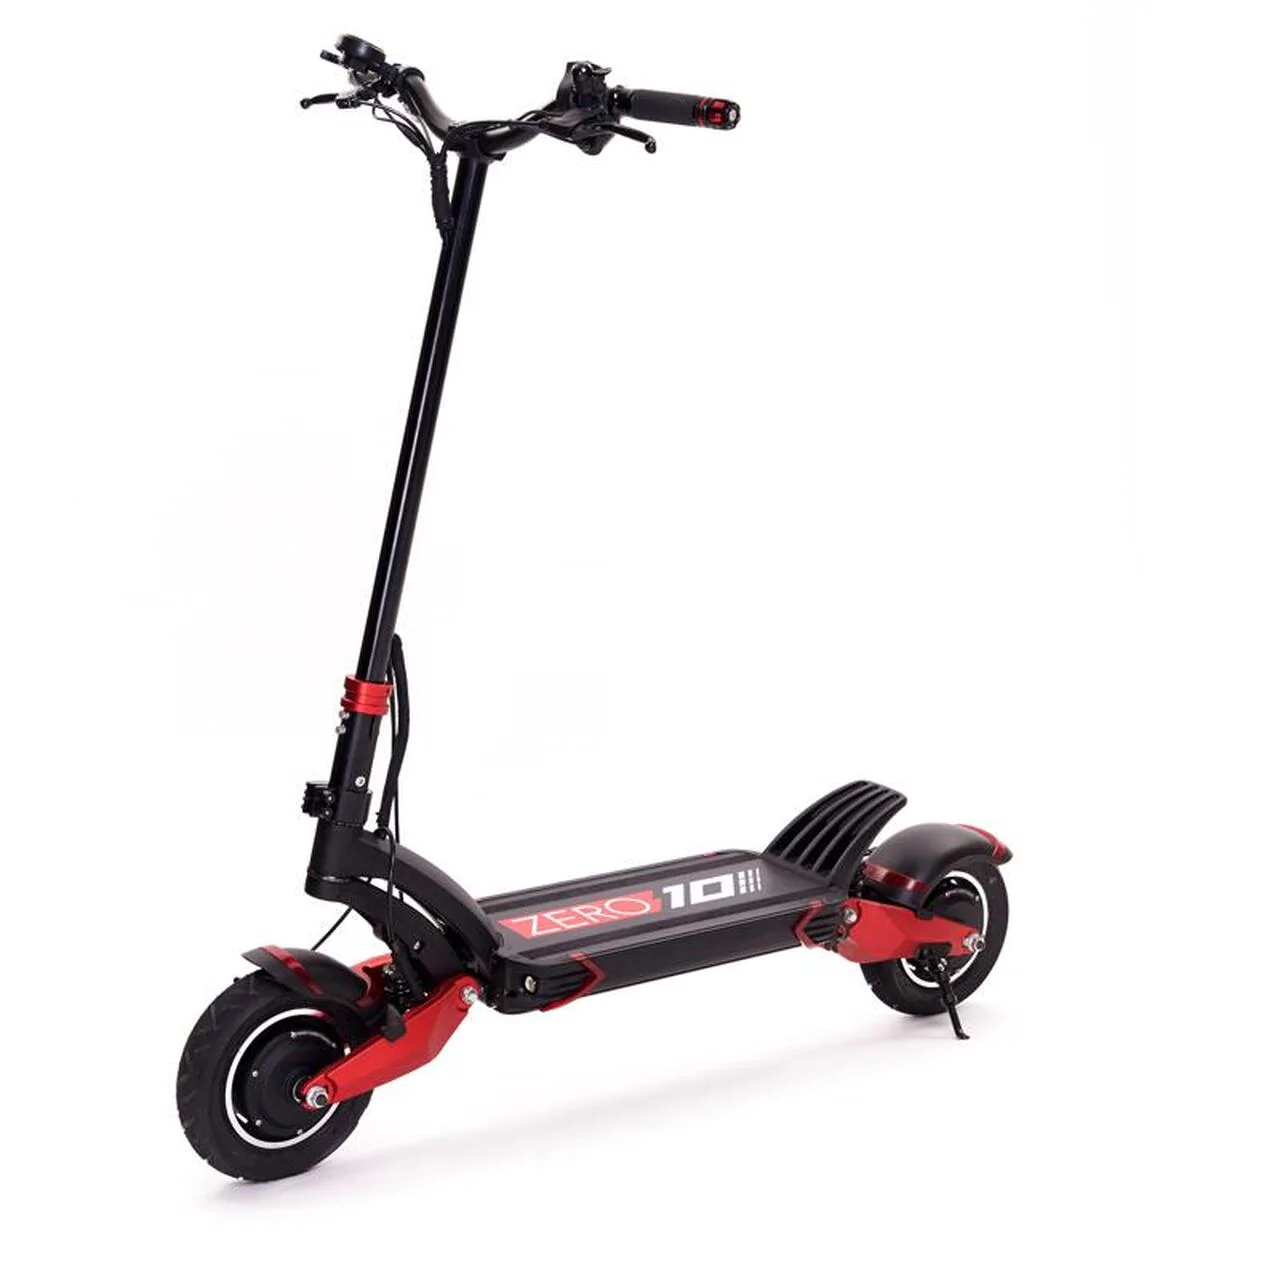 The Best Electric Scooters for Canadians